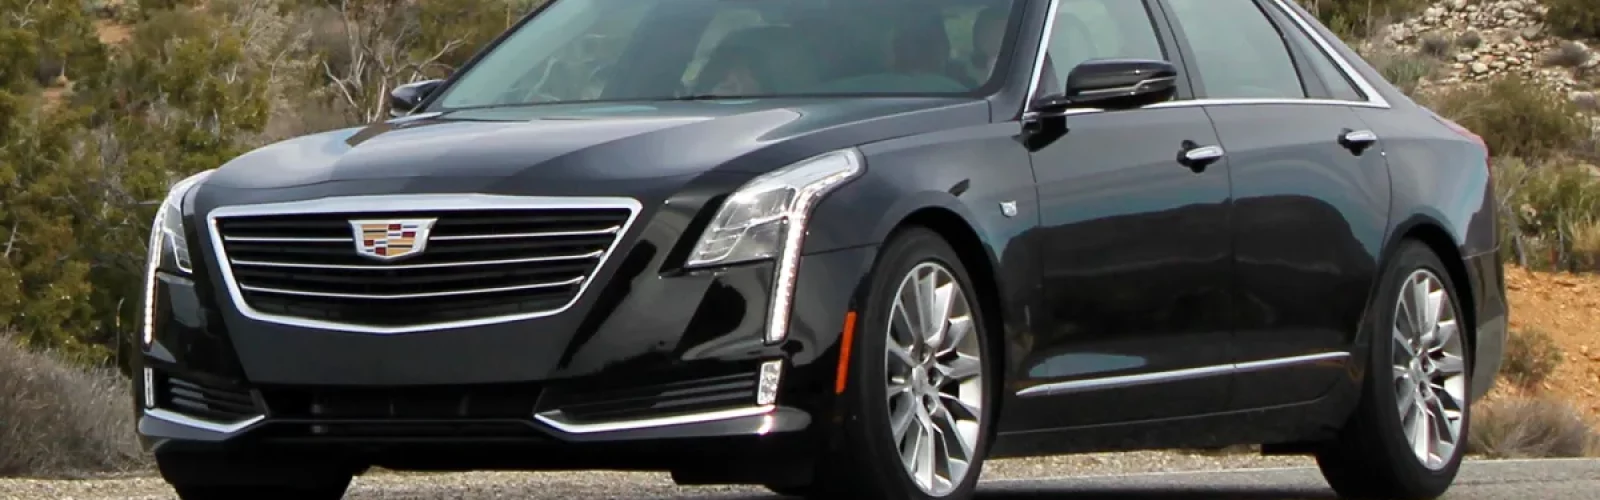 2016-Cadillac-CT6-First-Drive-Featured